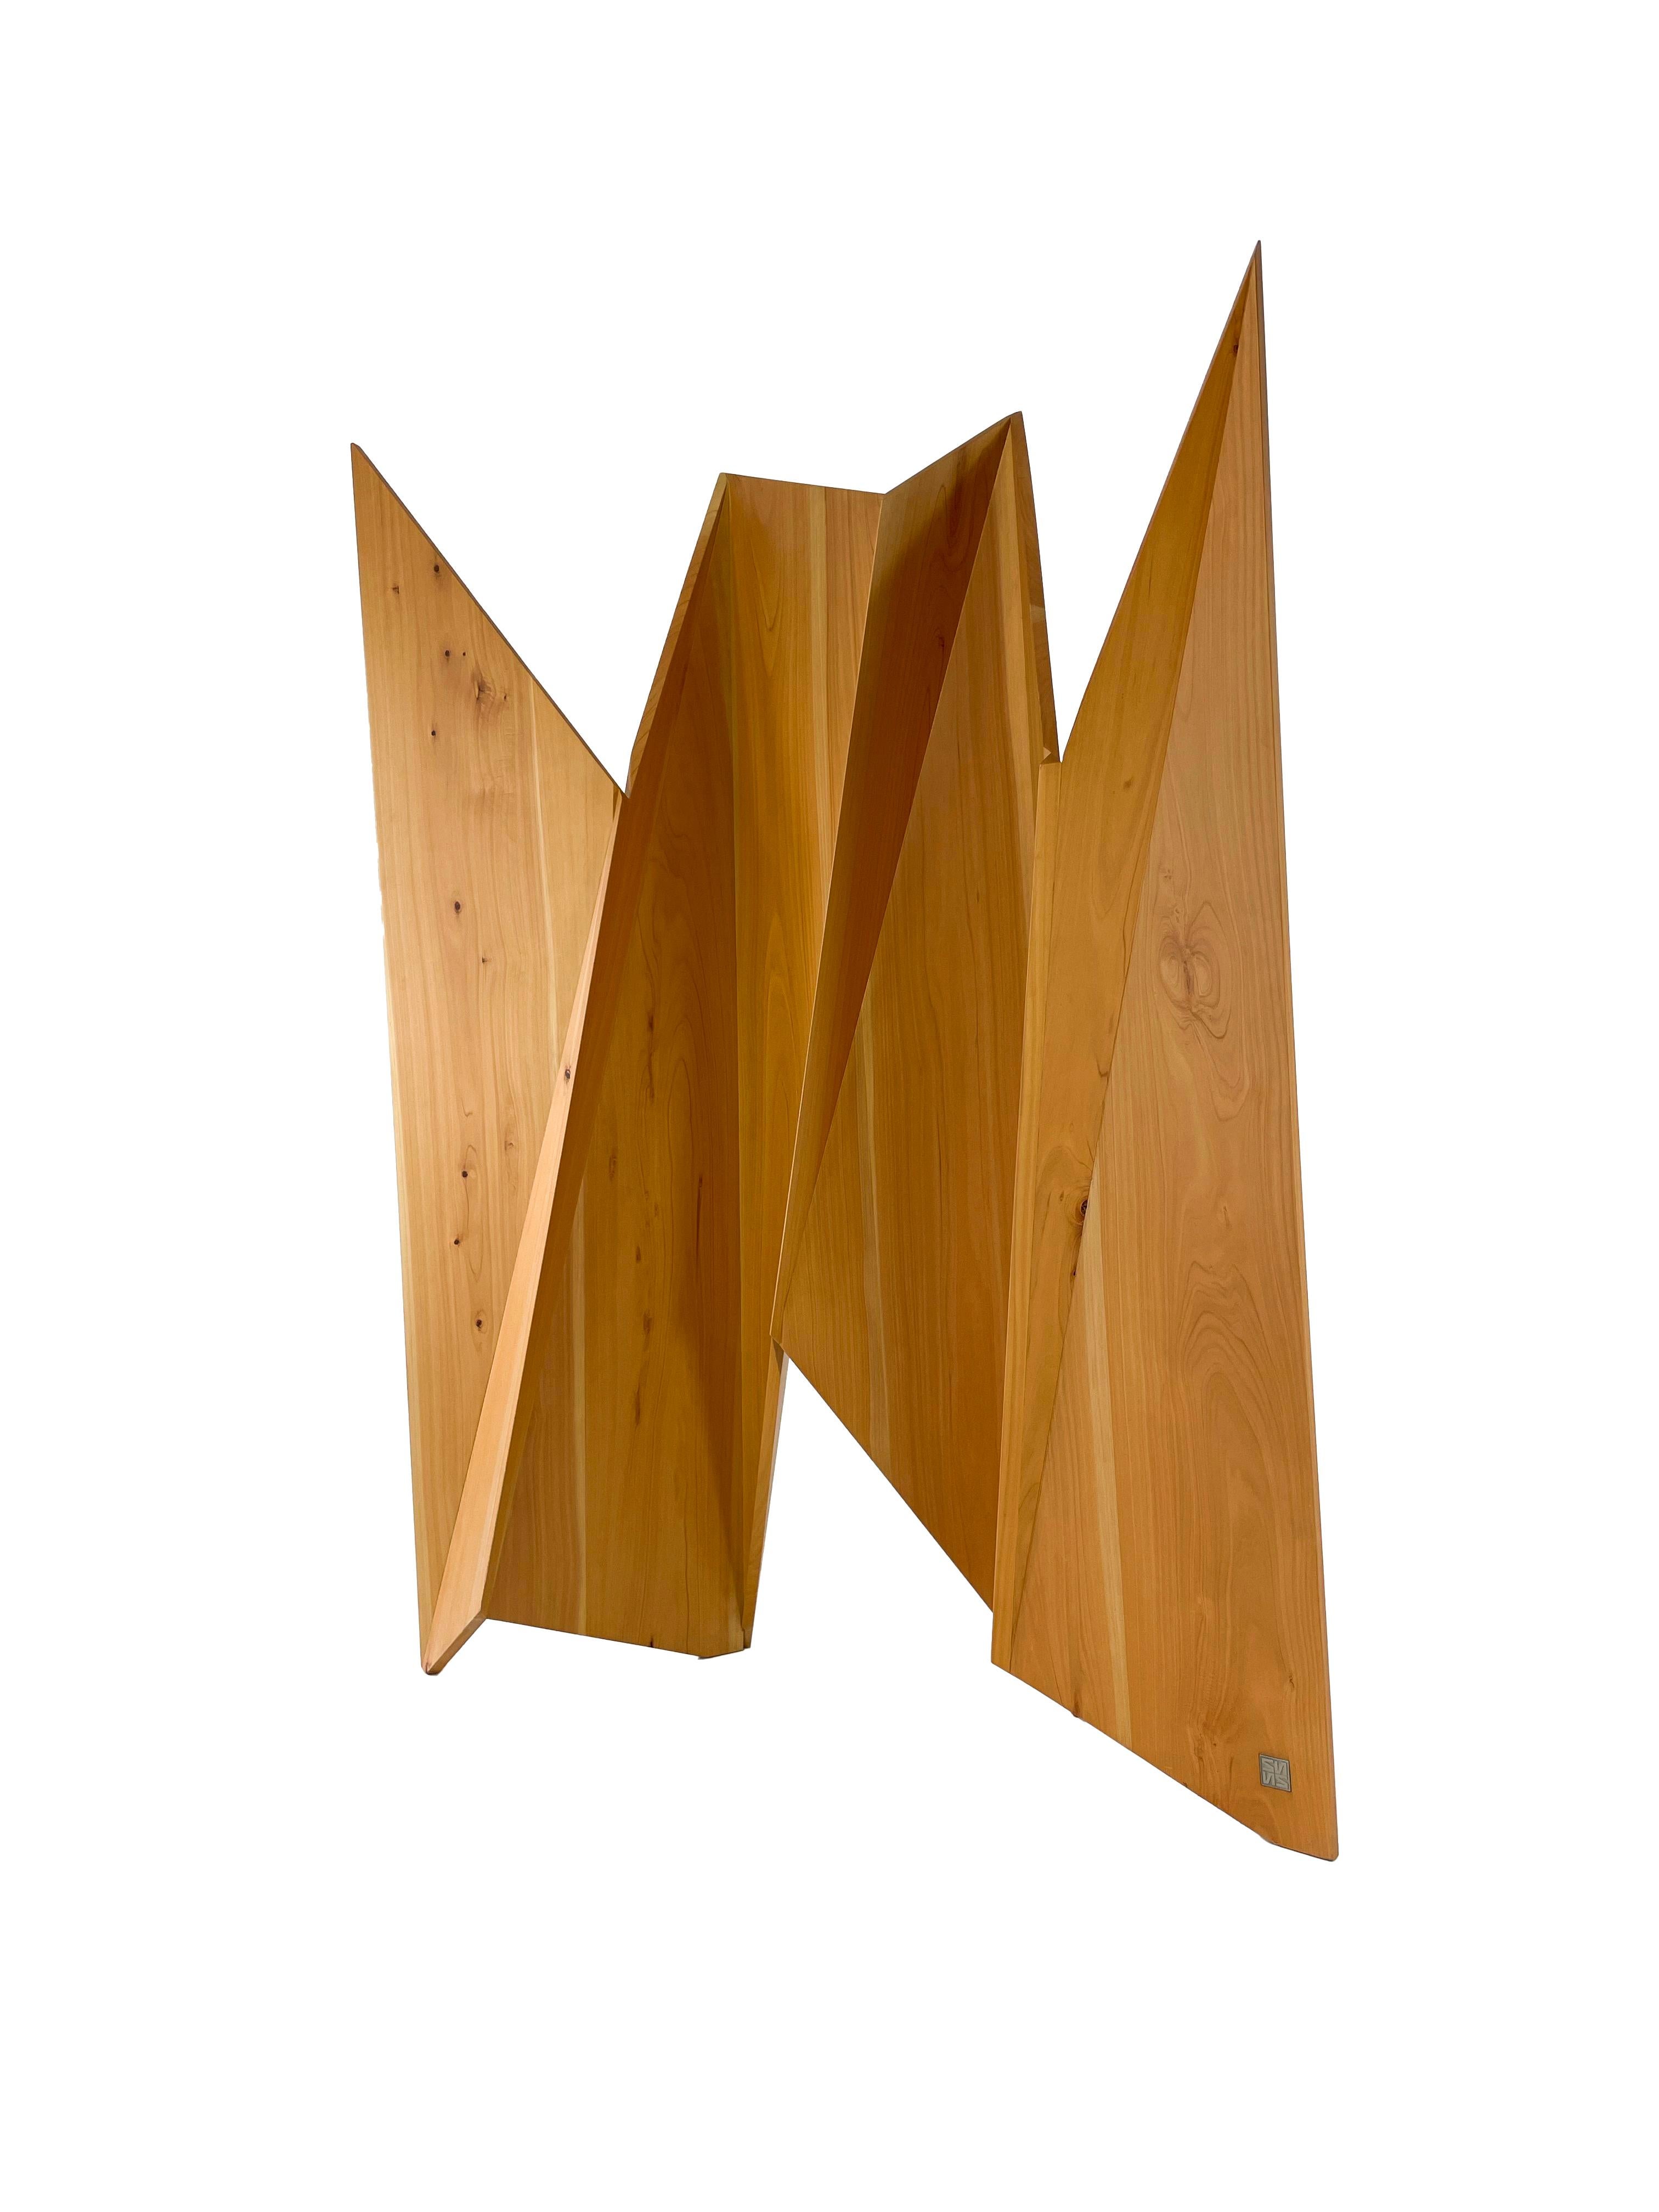 Modern Solid Wood Sculpture screen by Pierre Sarkis from Valentina Collection. Inspired in the Origami folds theory, finding in basic geometry meaning of life, truth and beauty. Artistic wooden screen a great option for open lobby halls or living